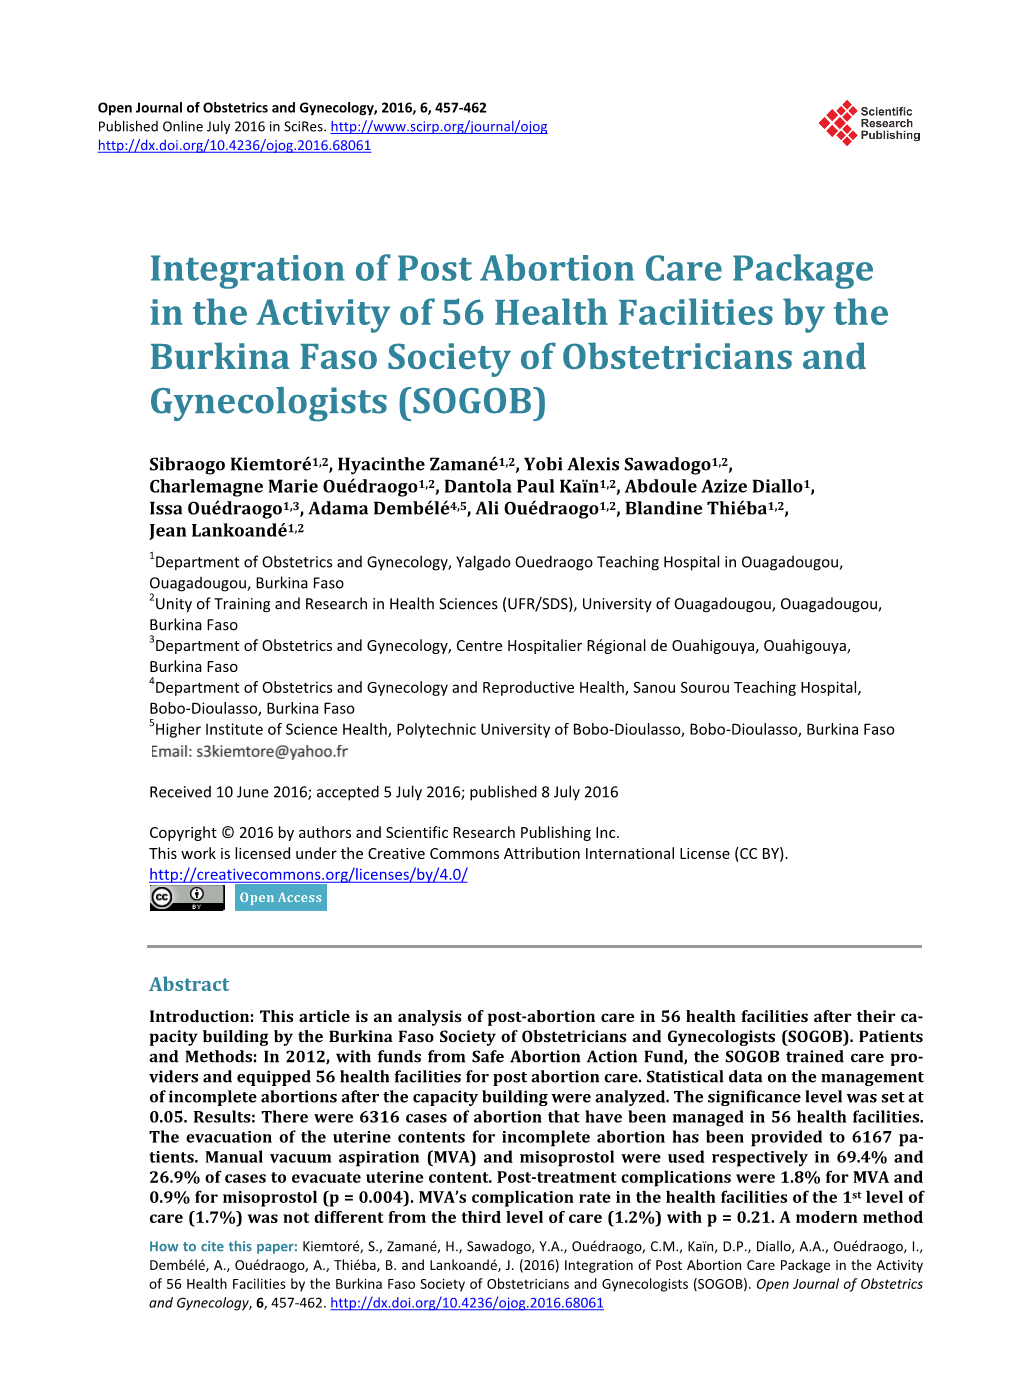 Integration of Post Abortion Care Package in the Activity of 56 Health Facilities by the Burkina Faso Society of Obstetricians and Gynecologists (SOGOB)